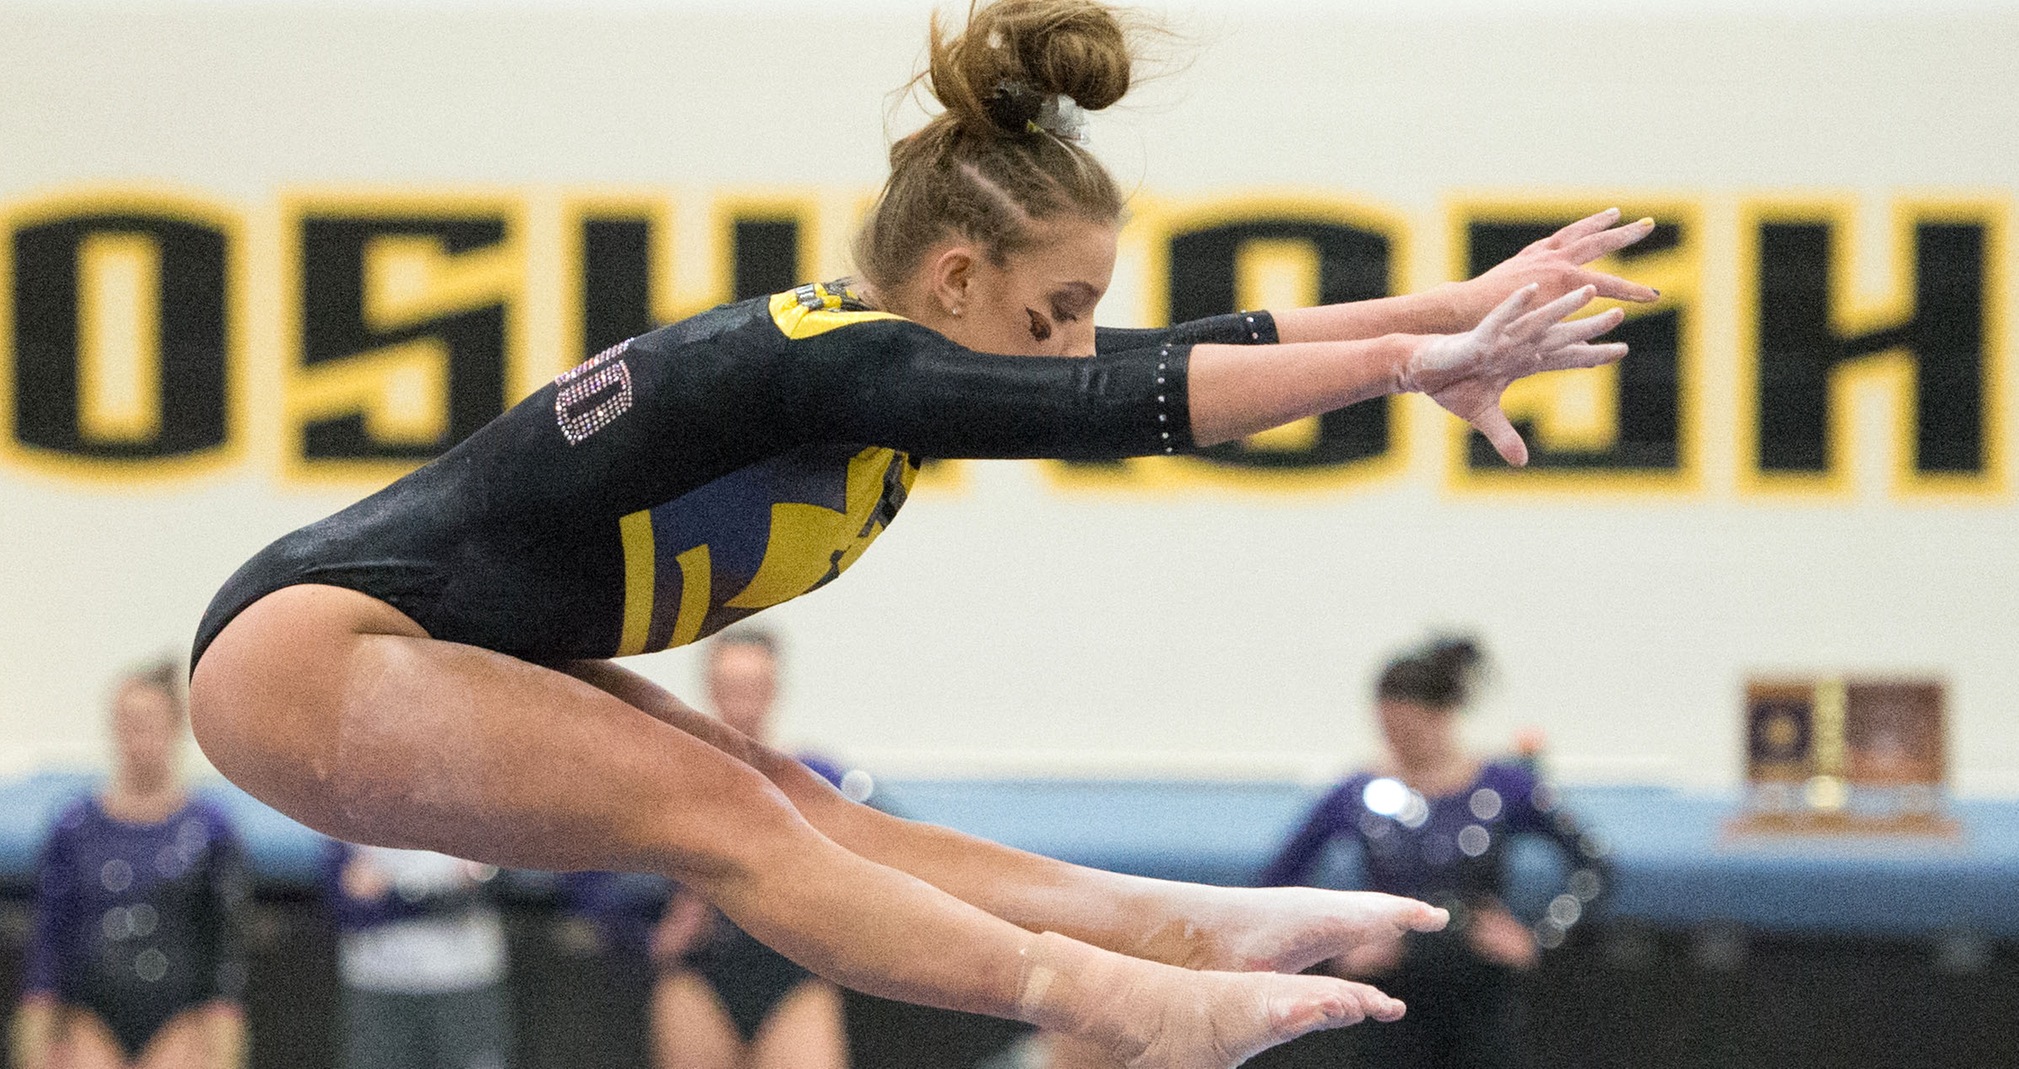 Baylee Tkaczuk placed fifth on the uneven bars and seventh on the balance beam at the Pink Meet.